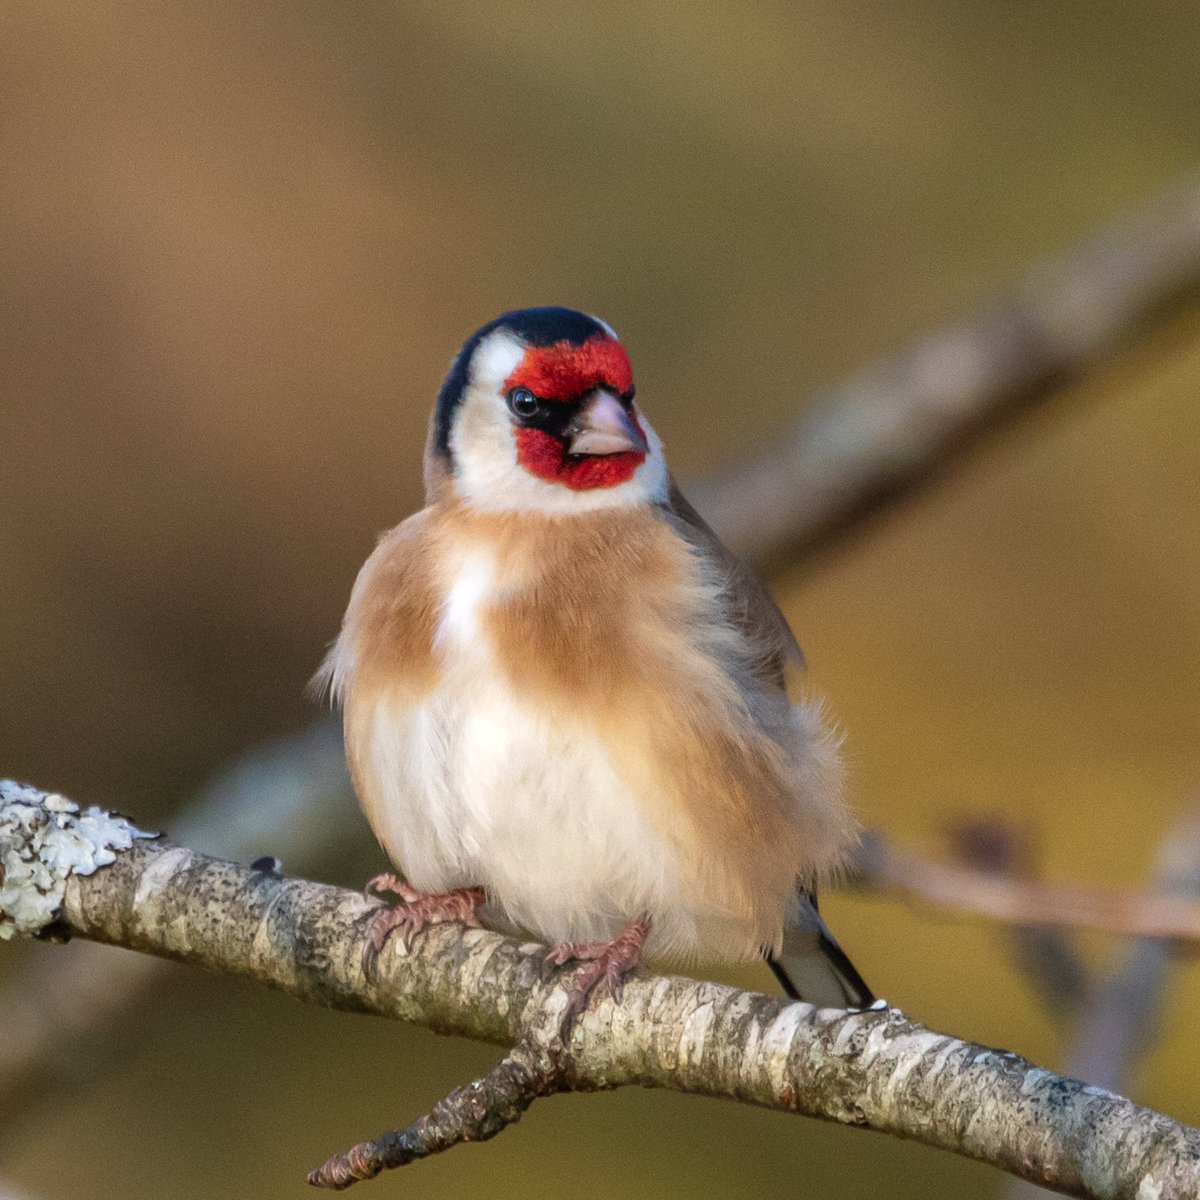 Good morning all. The beautiful, red face of a Goldfinch. Wishing everyone a happy and safe Sunday. #TwitterNatureCommunity #TwitterNaturePhotography #nature #birds #birdphotography #naturelovers #wildlife andyjennerphotography.com